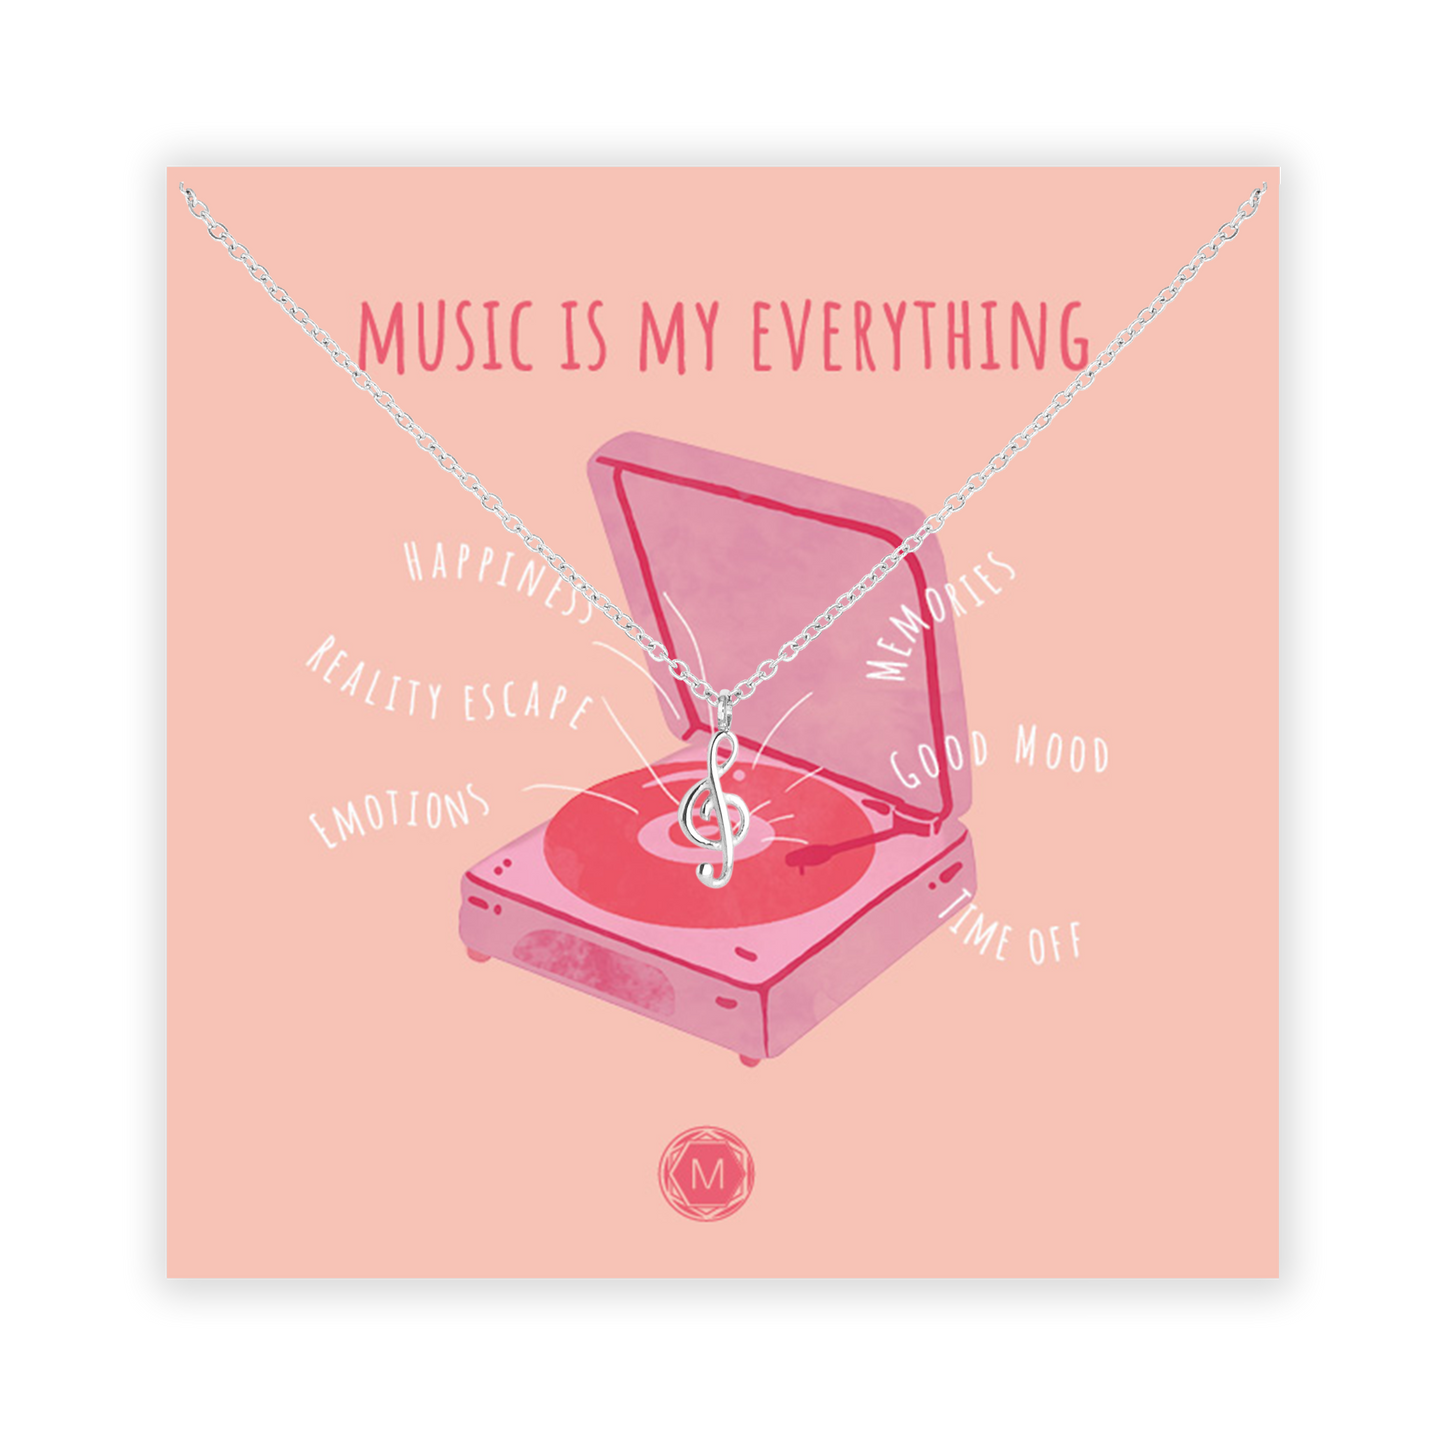 MUSIC IS MY EVERYTHING Necklace